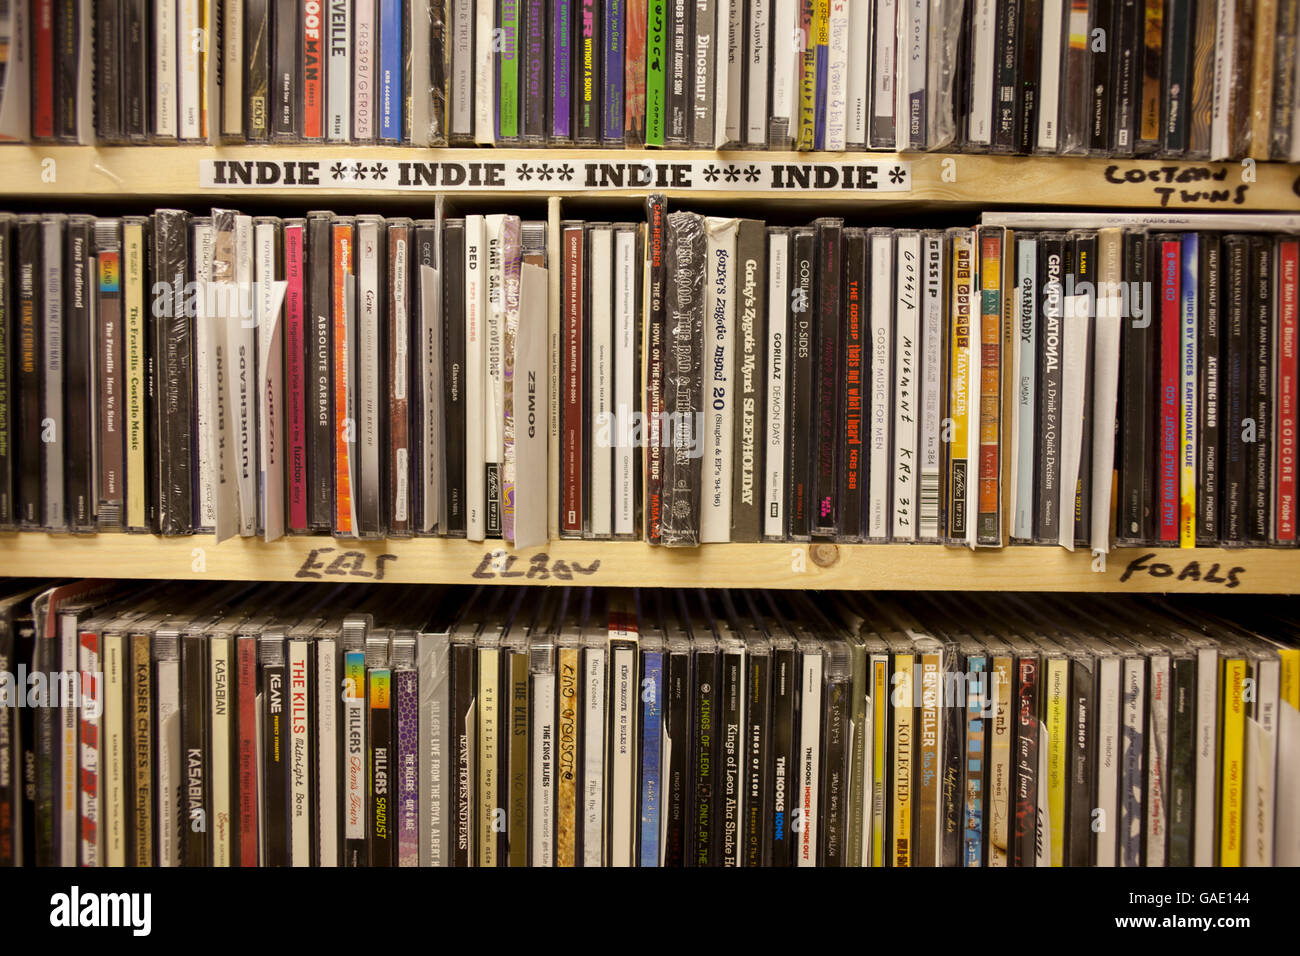 CD's for sale in a record music store Stock Photo